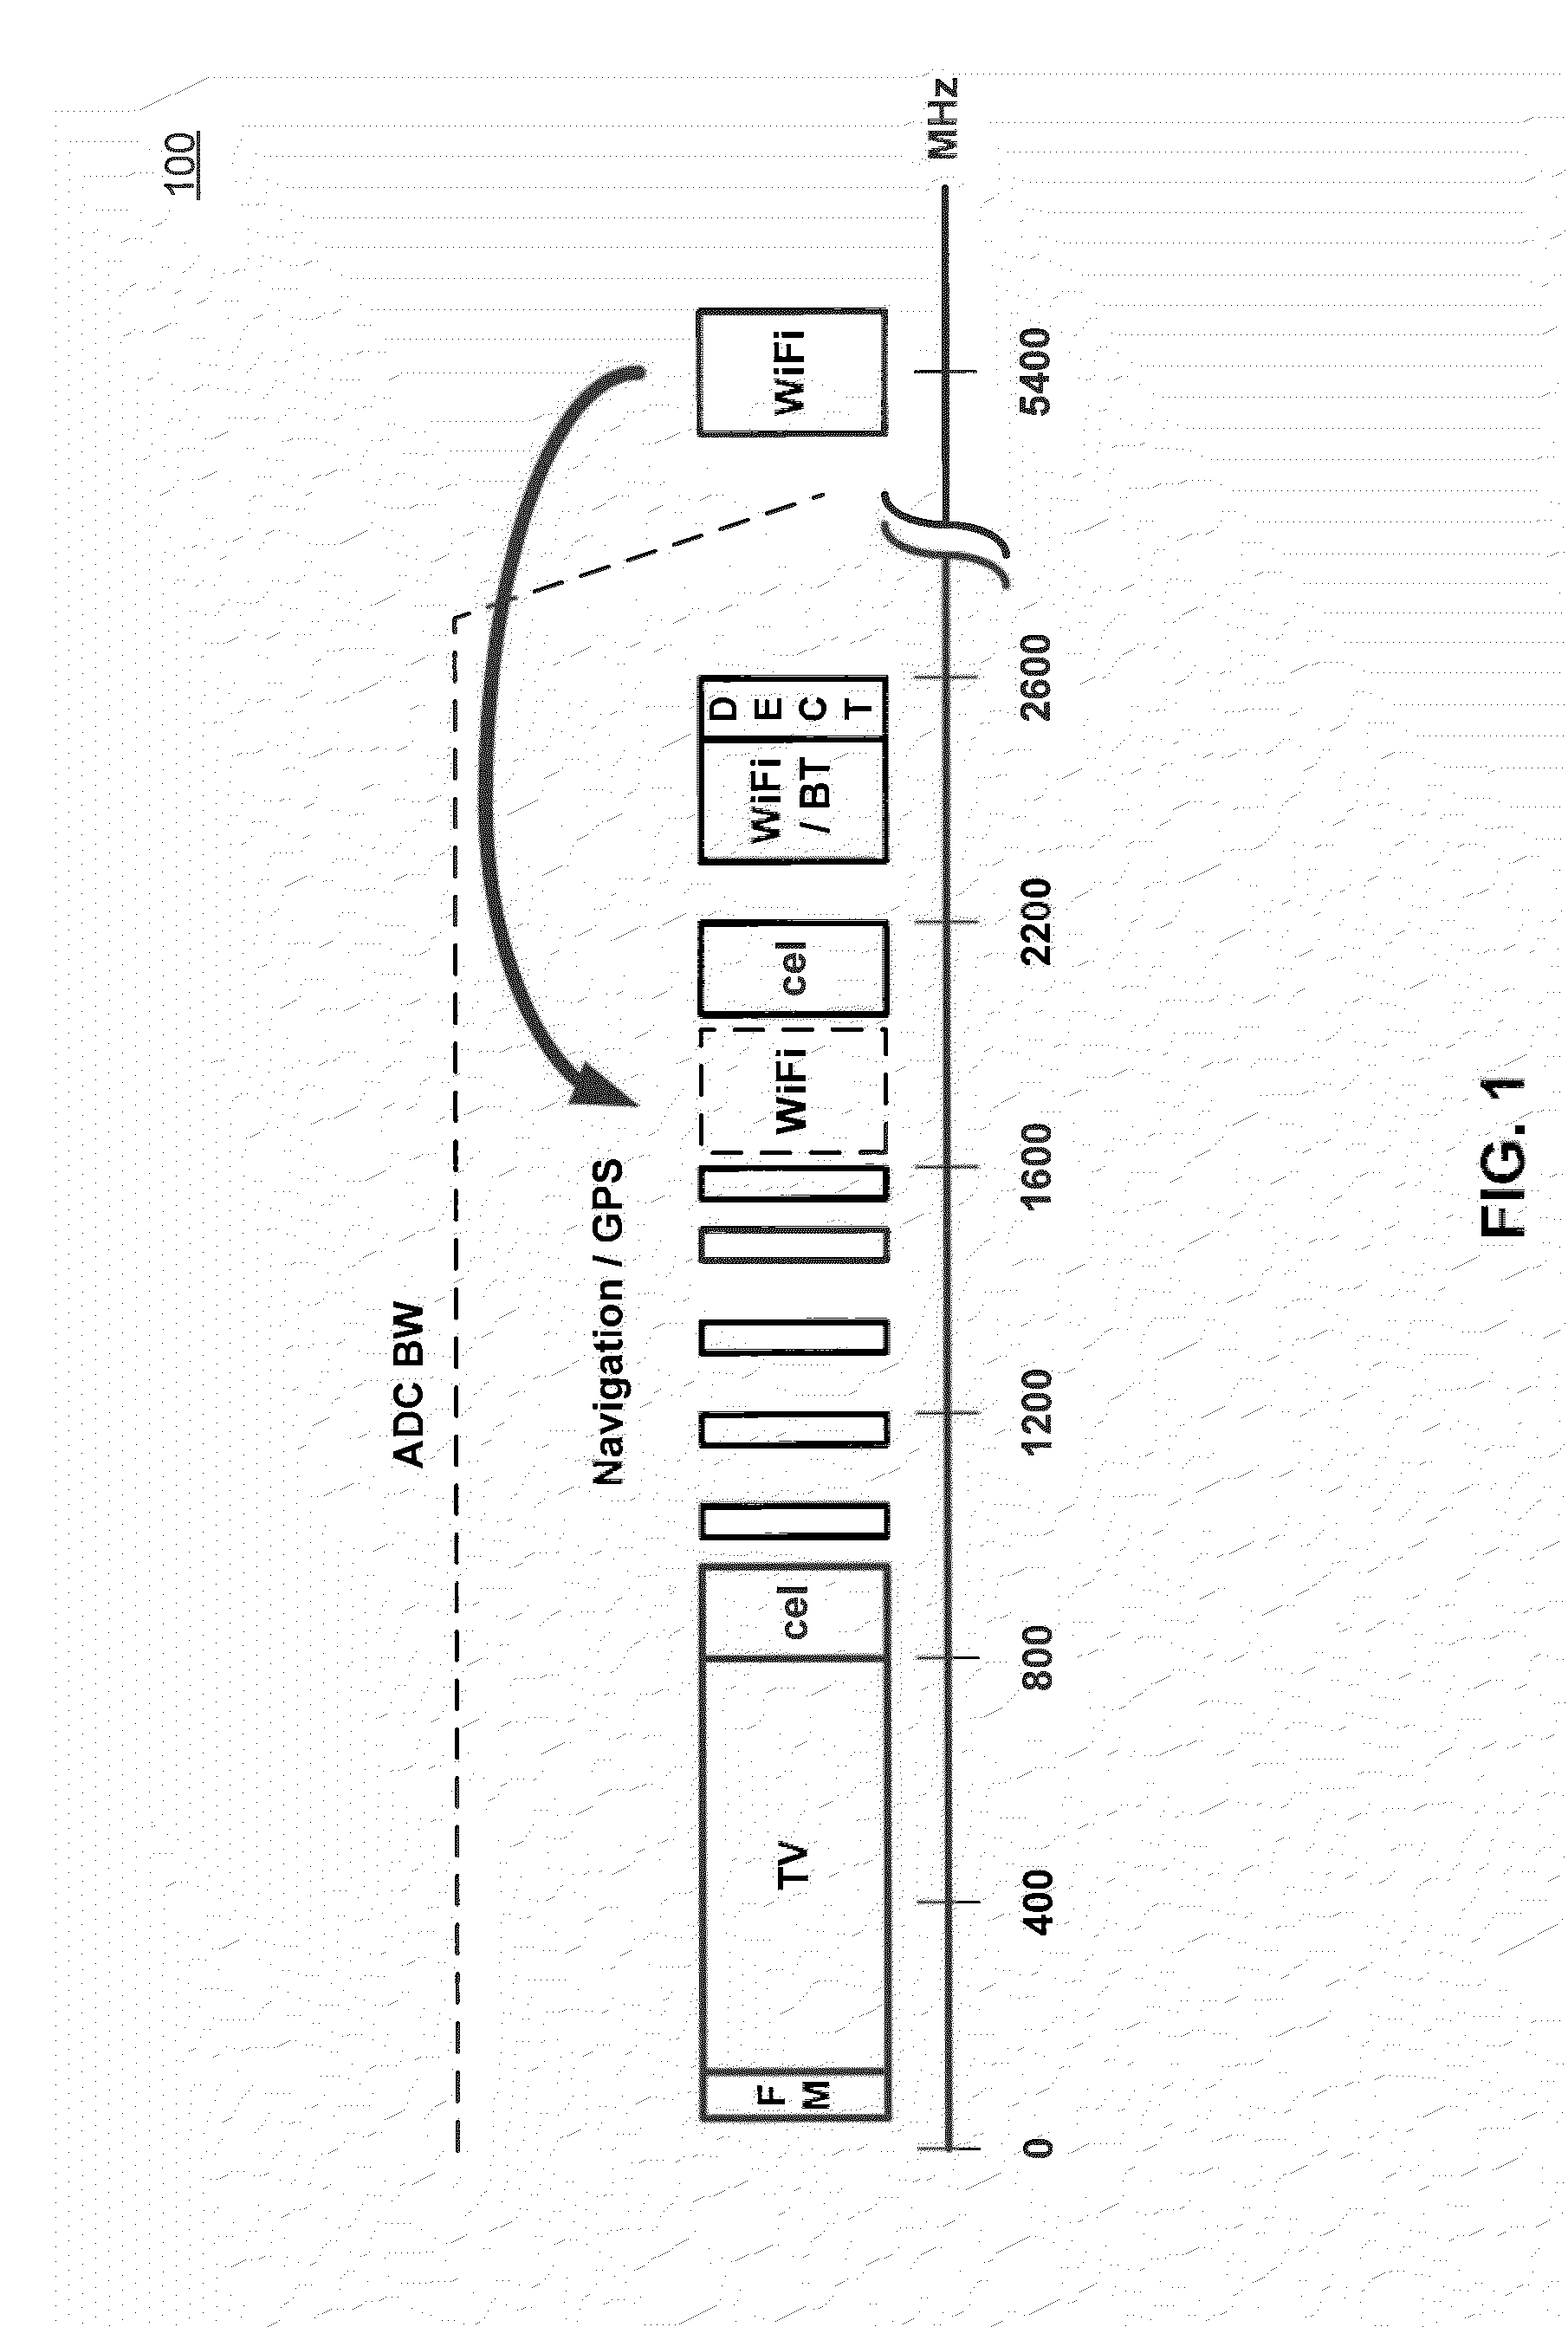 Multi-Standard Front End Using Wideband Data Converters